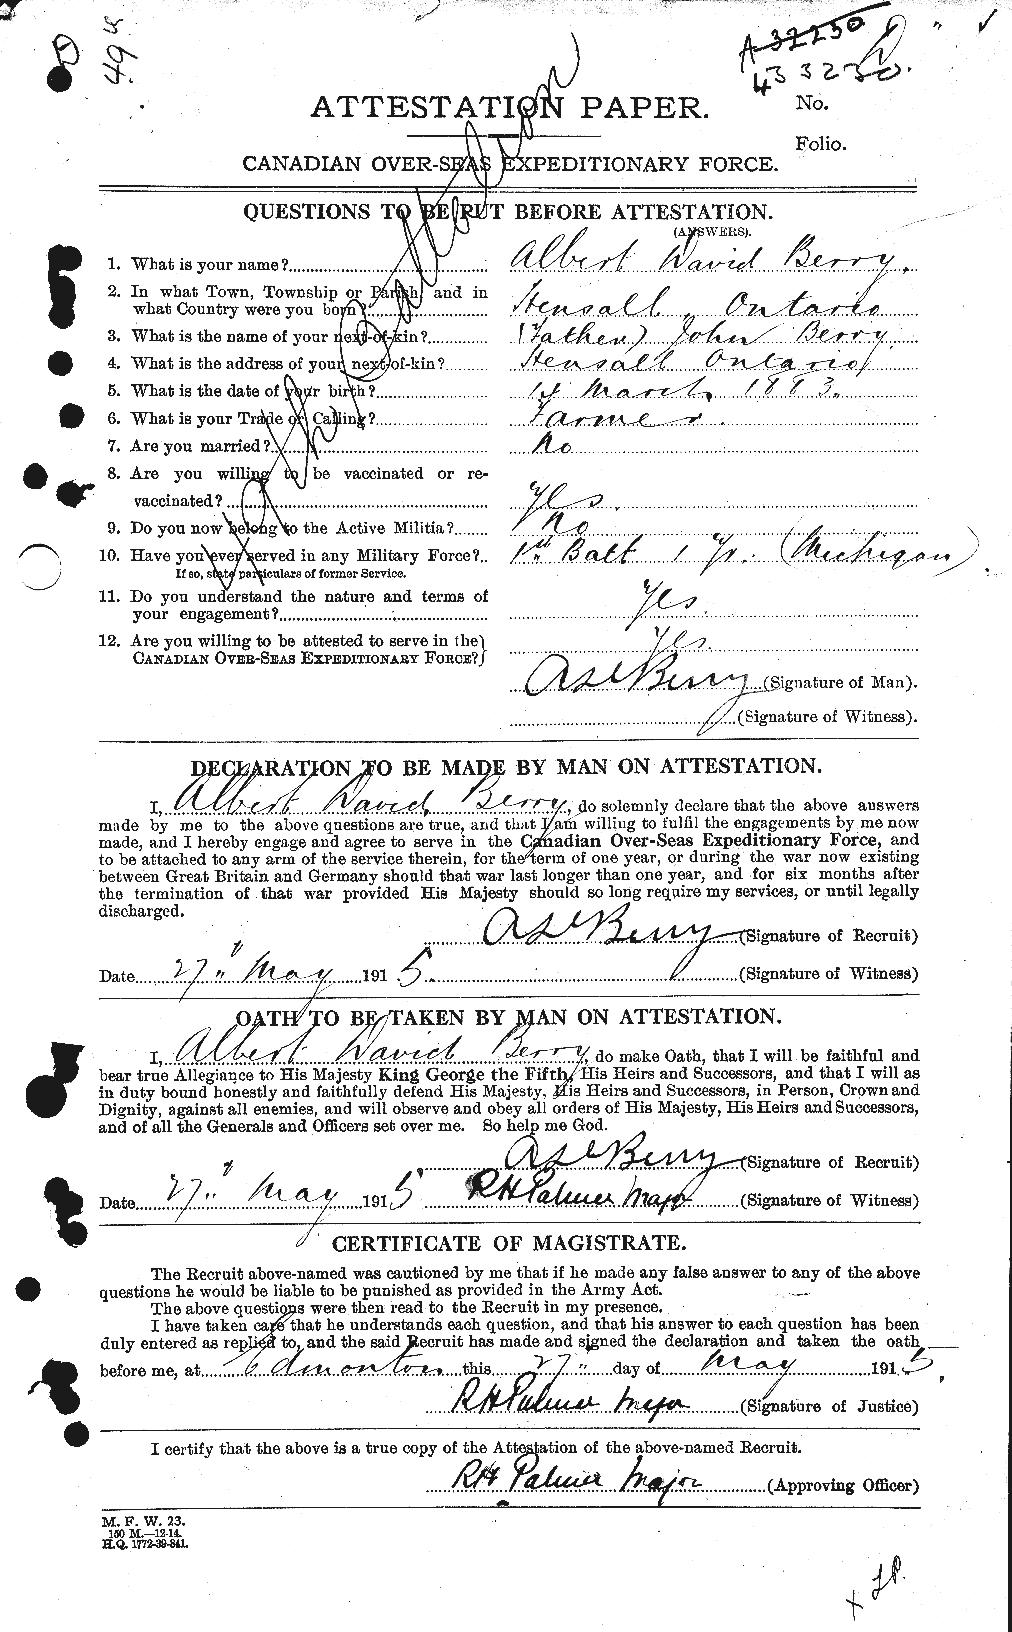 Personnel Records of the First World War - CEF 240764a